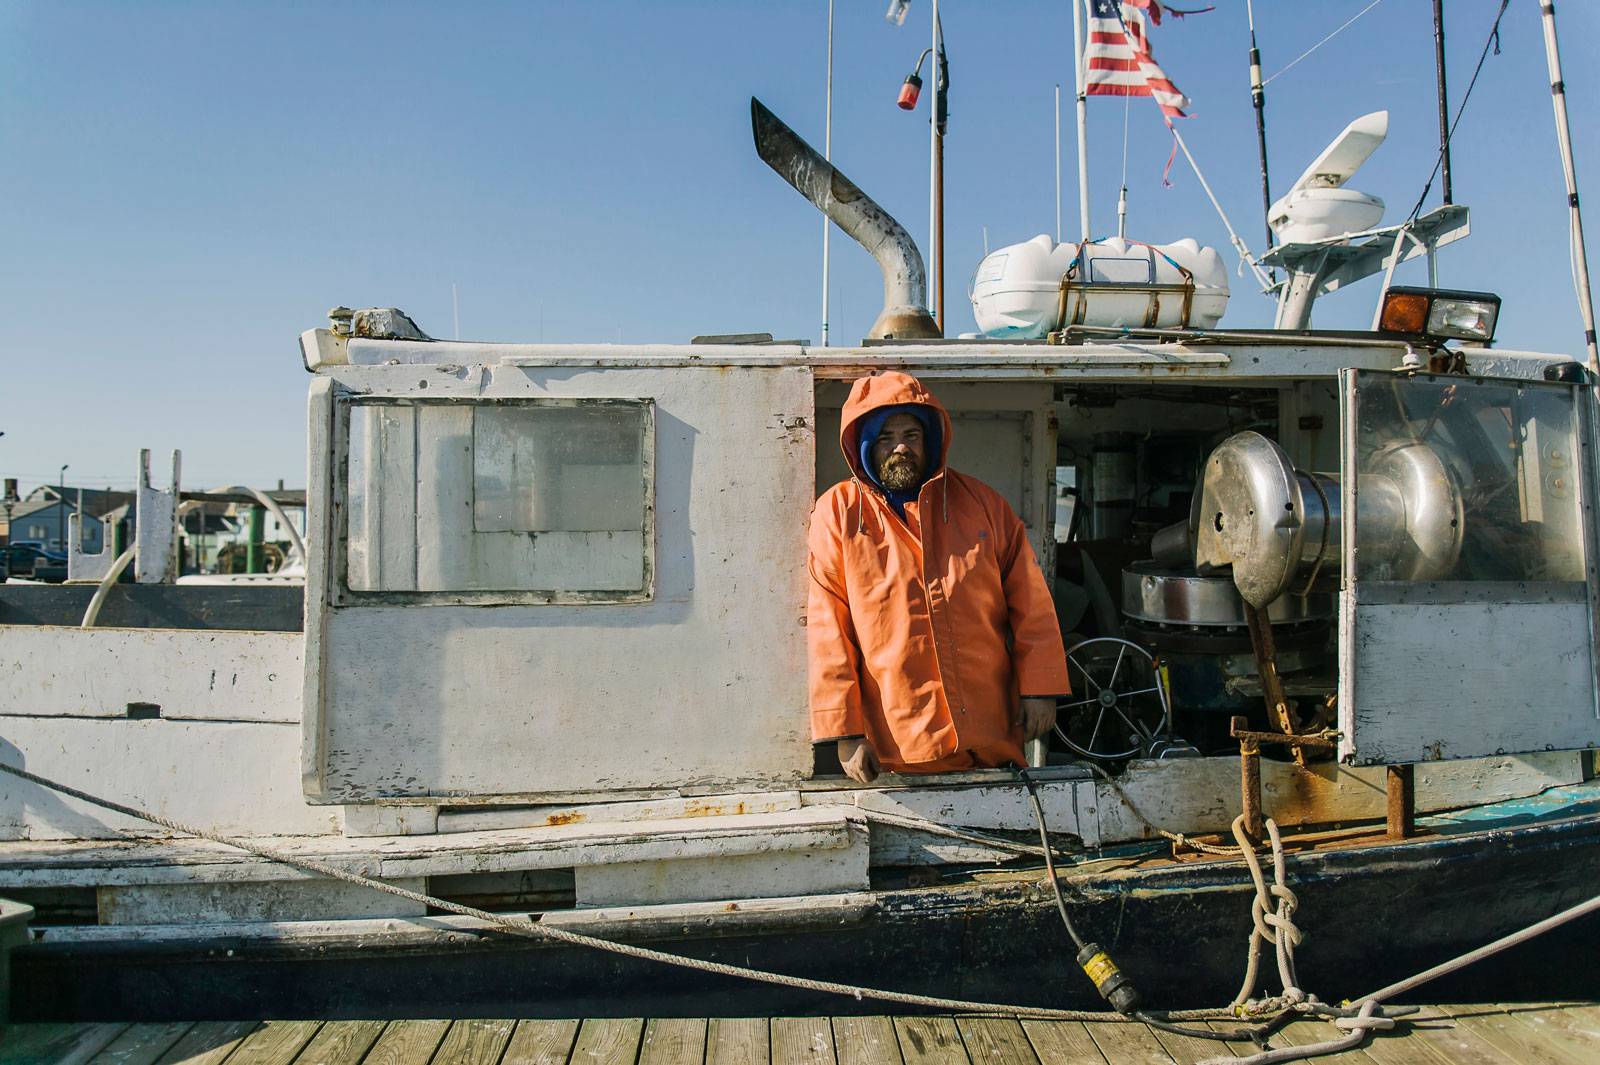 Portrait of Commercial Fisherman on his boat